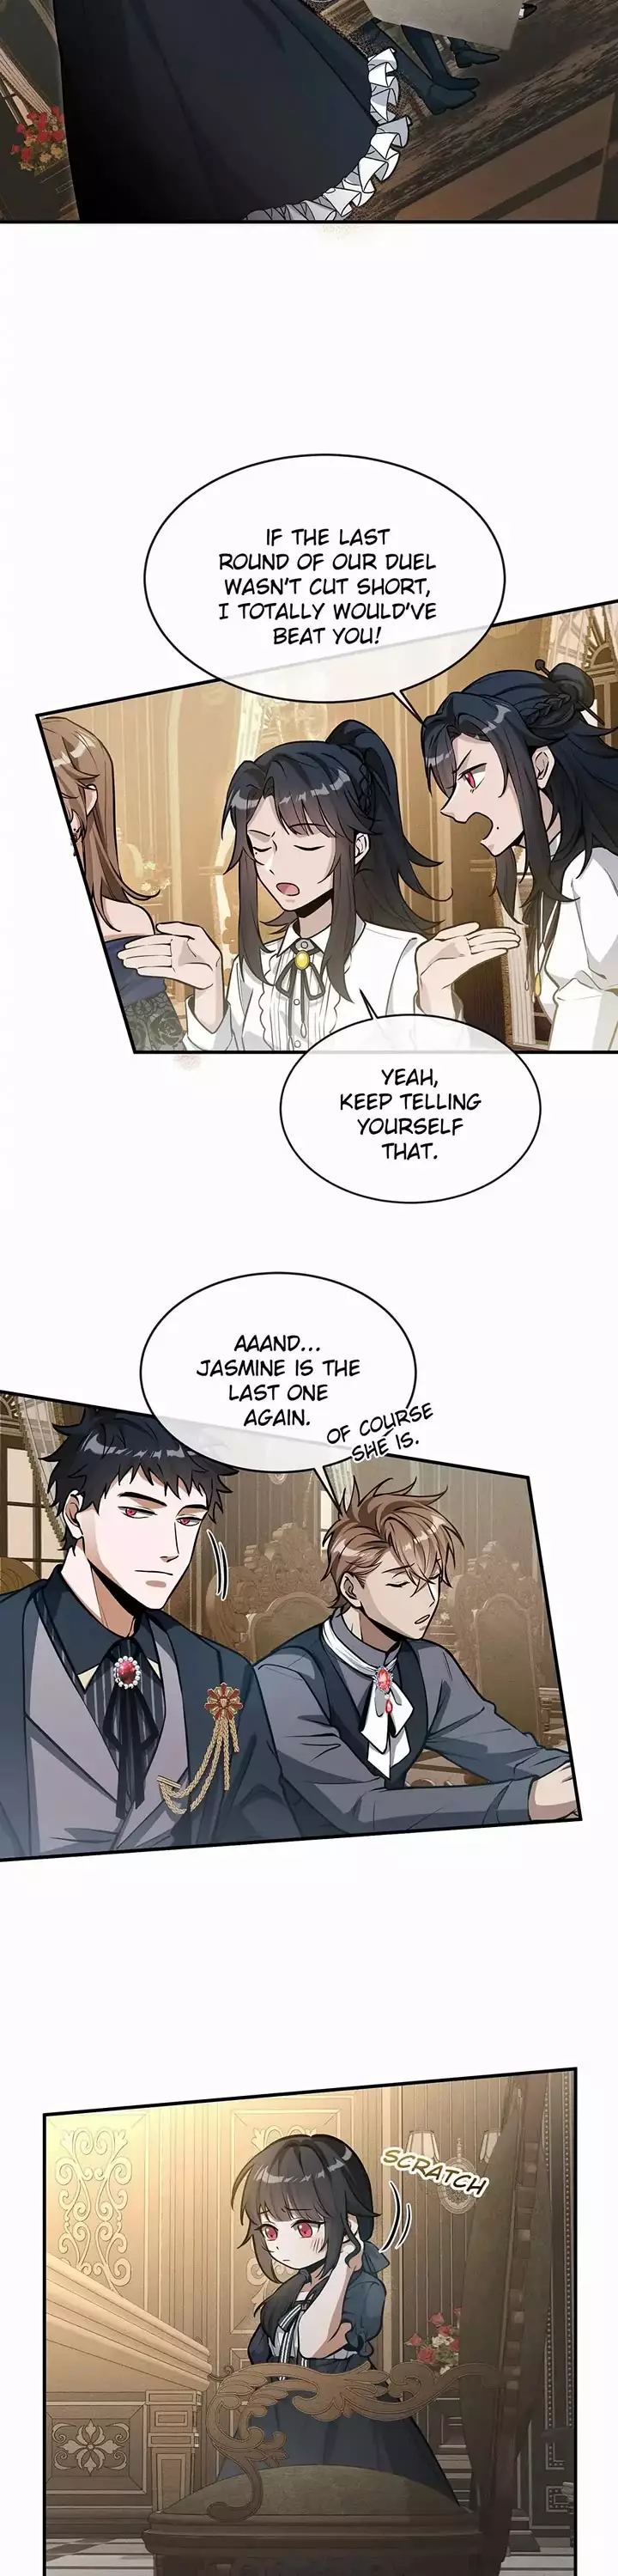 The Beginning After The End: Side Story - Jasmine: Wind-Borne - 1 page 19-c7aba234